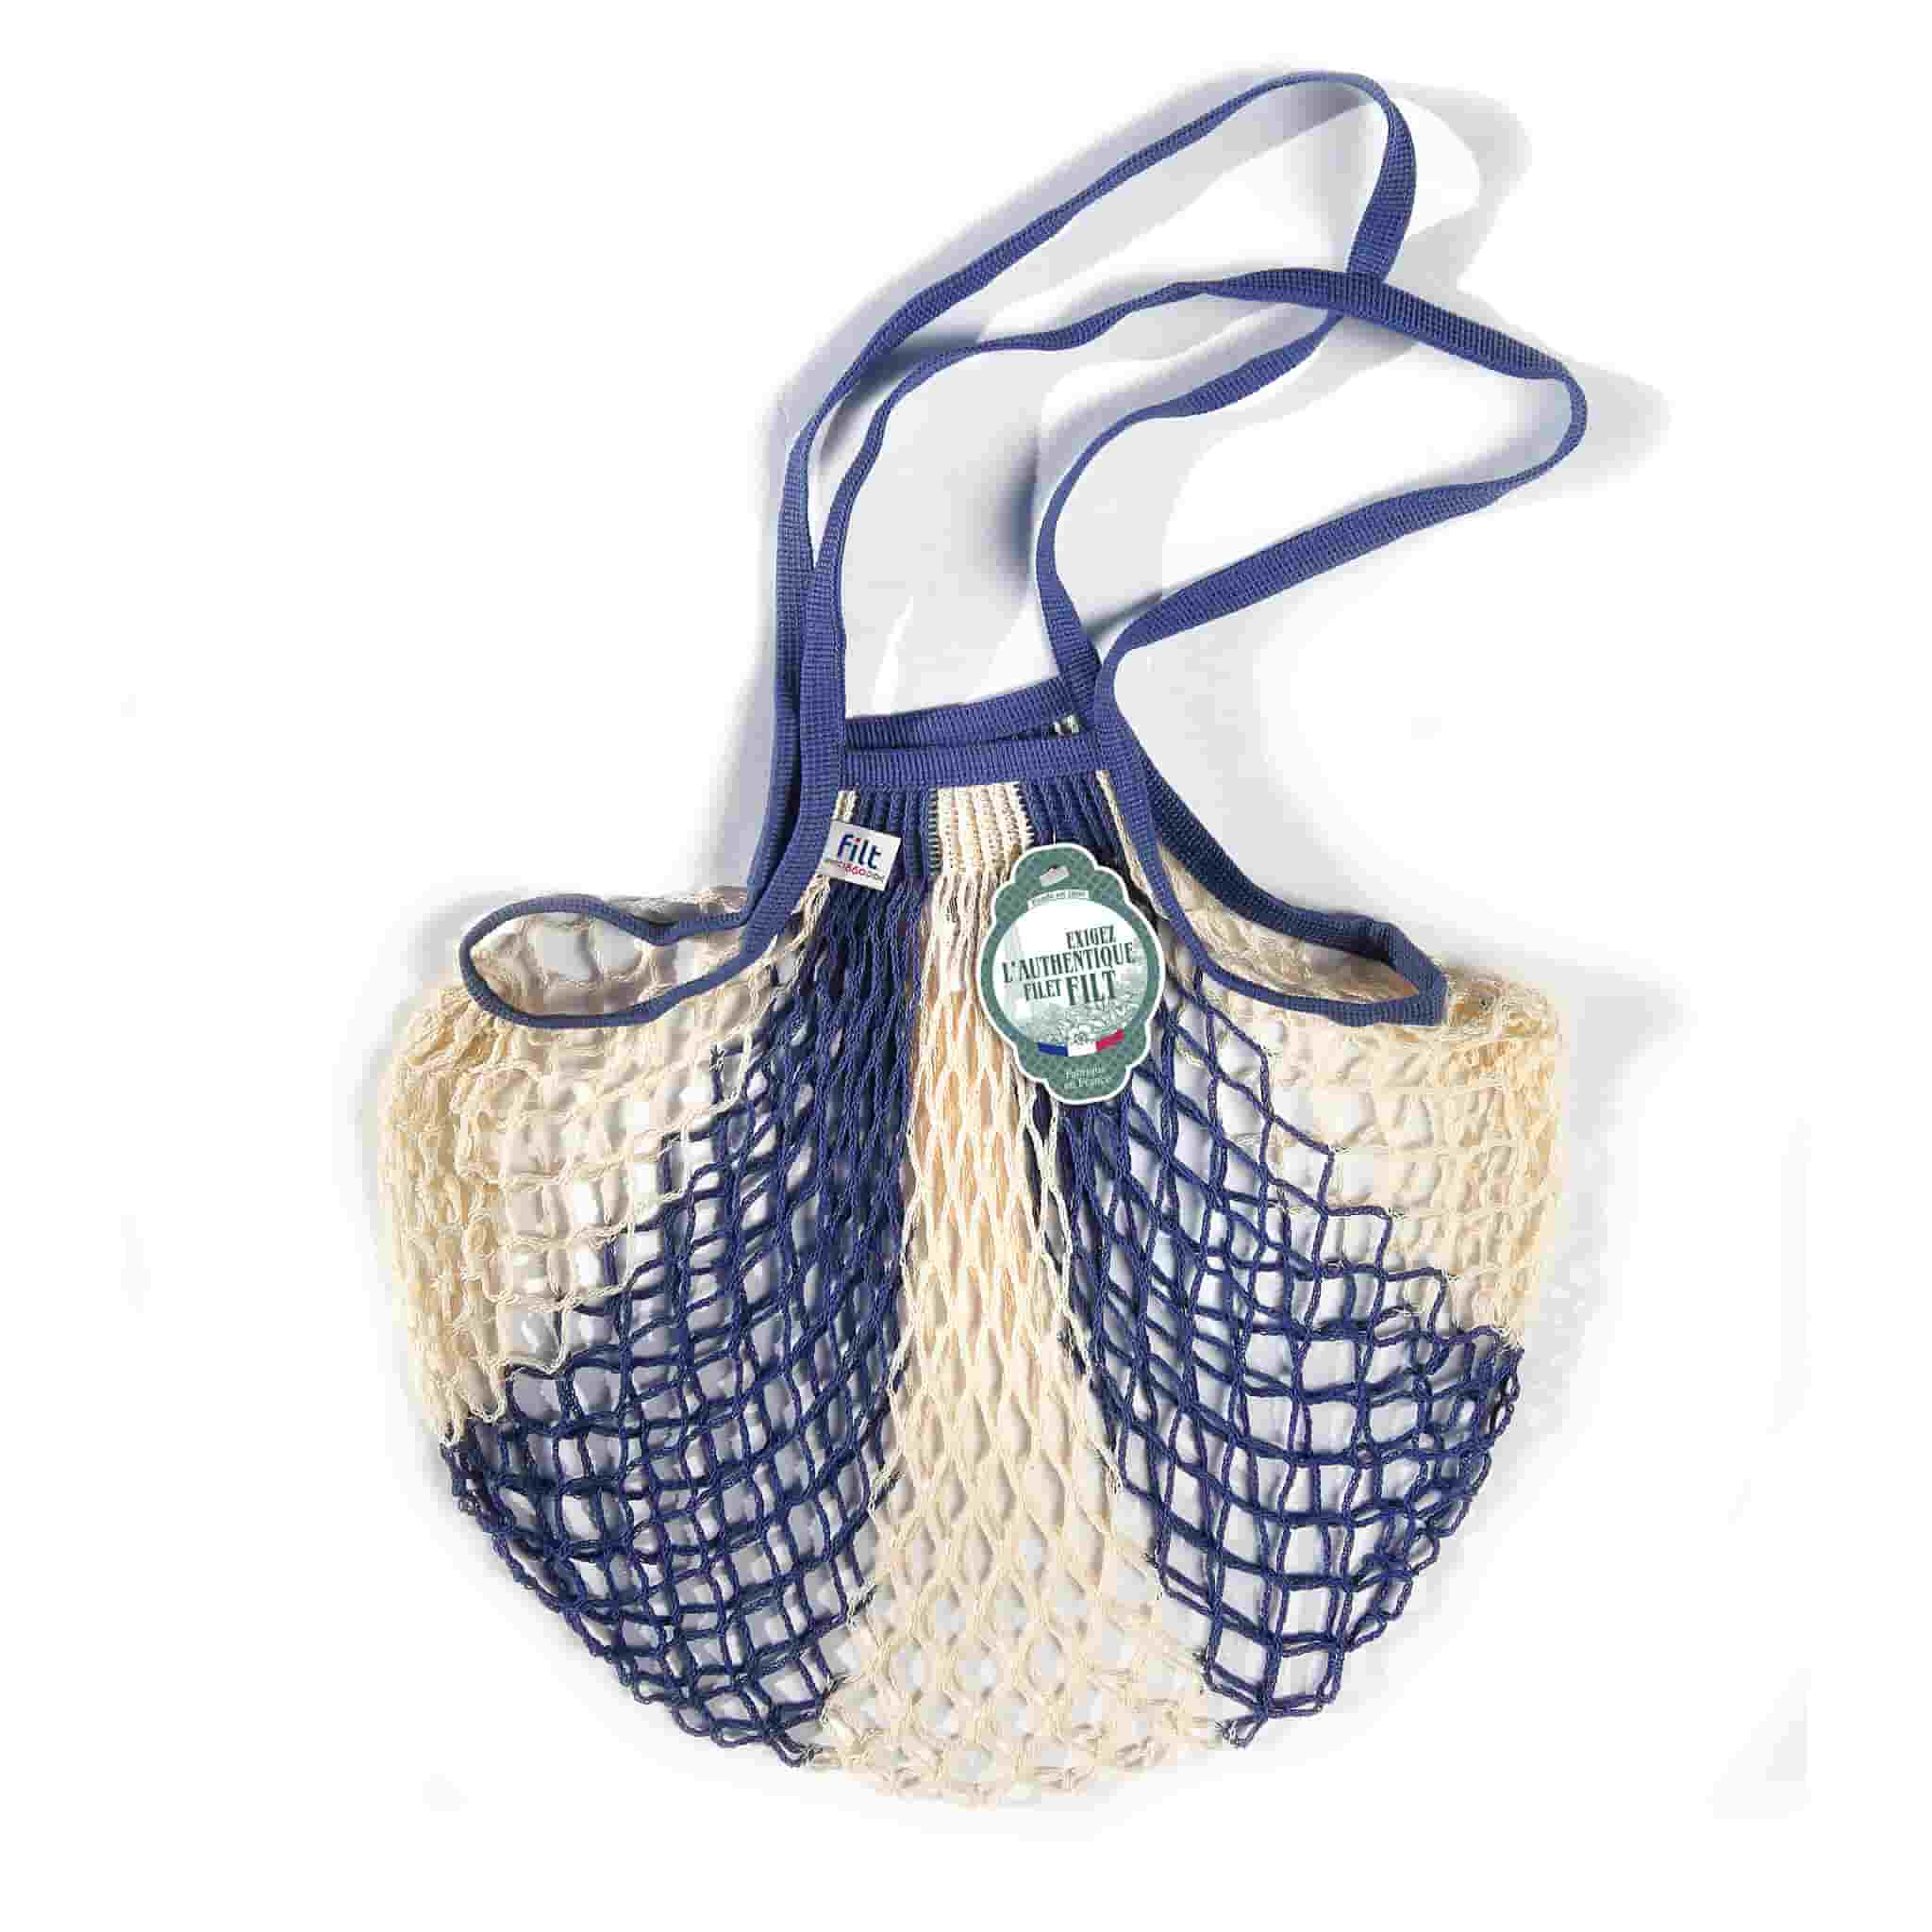 Filt String Bag in Blue and White, Long Handle